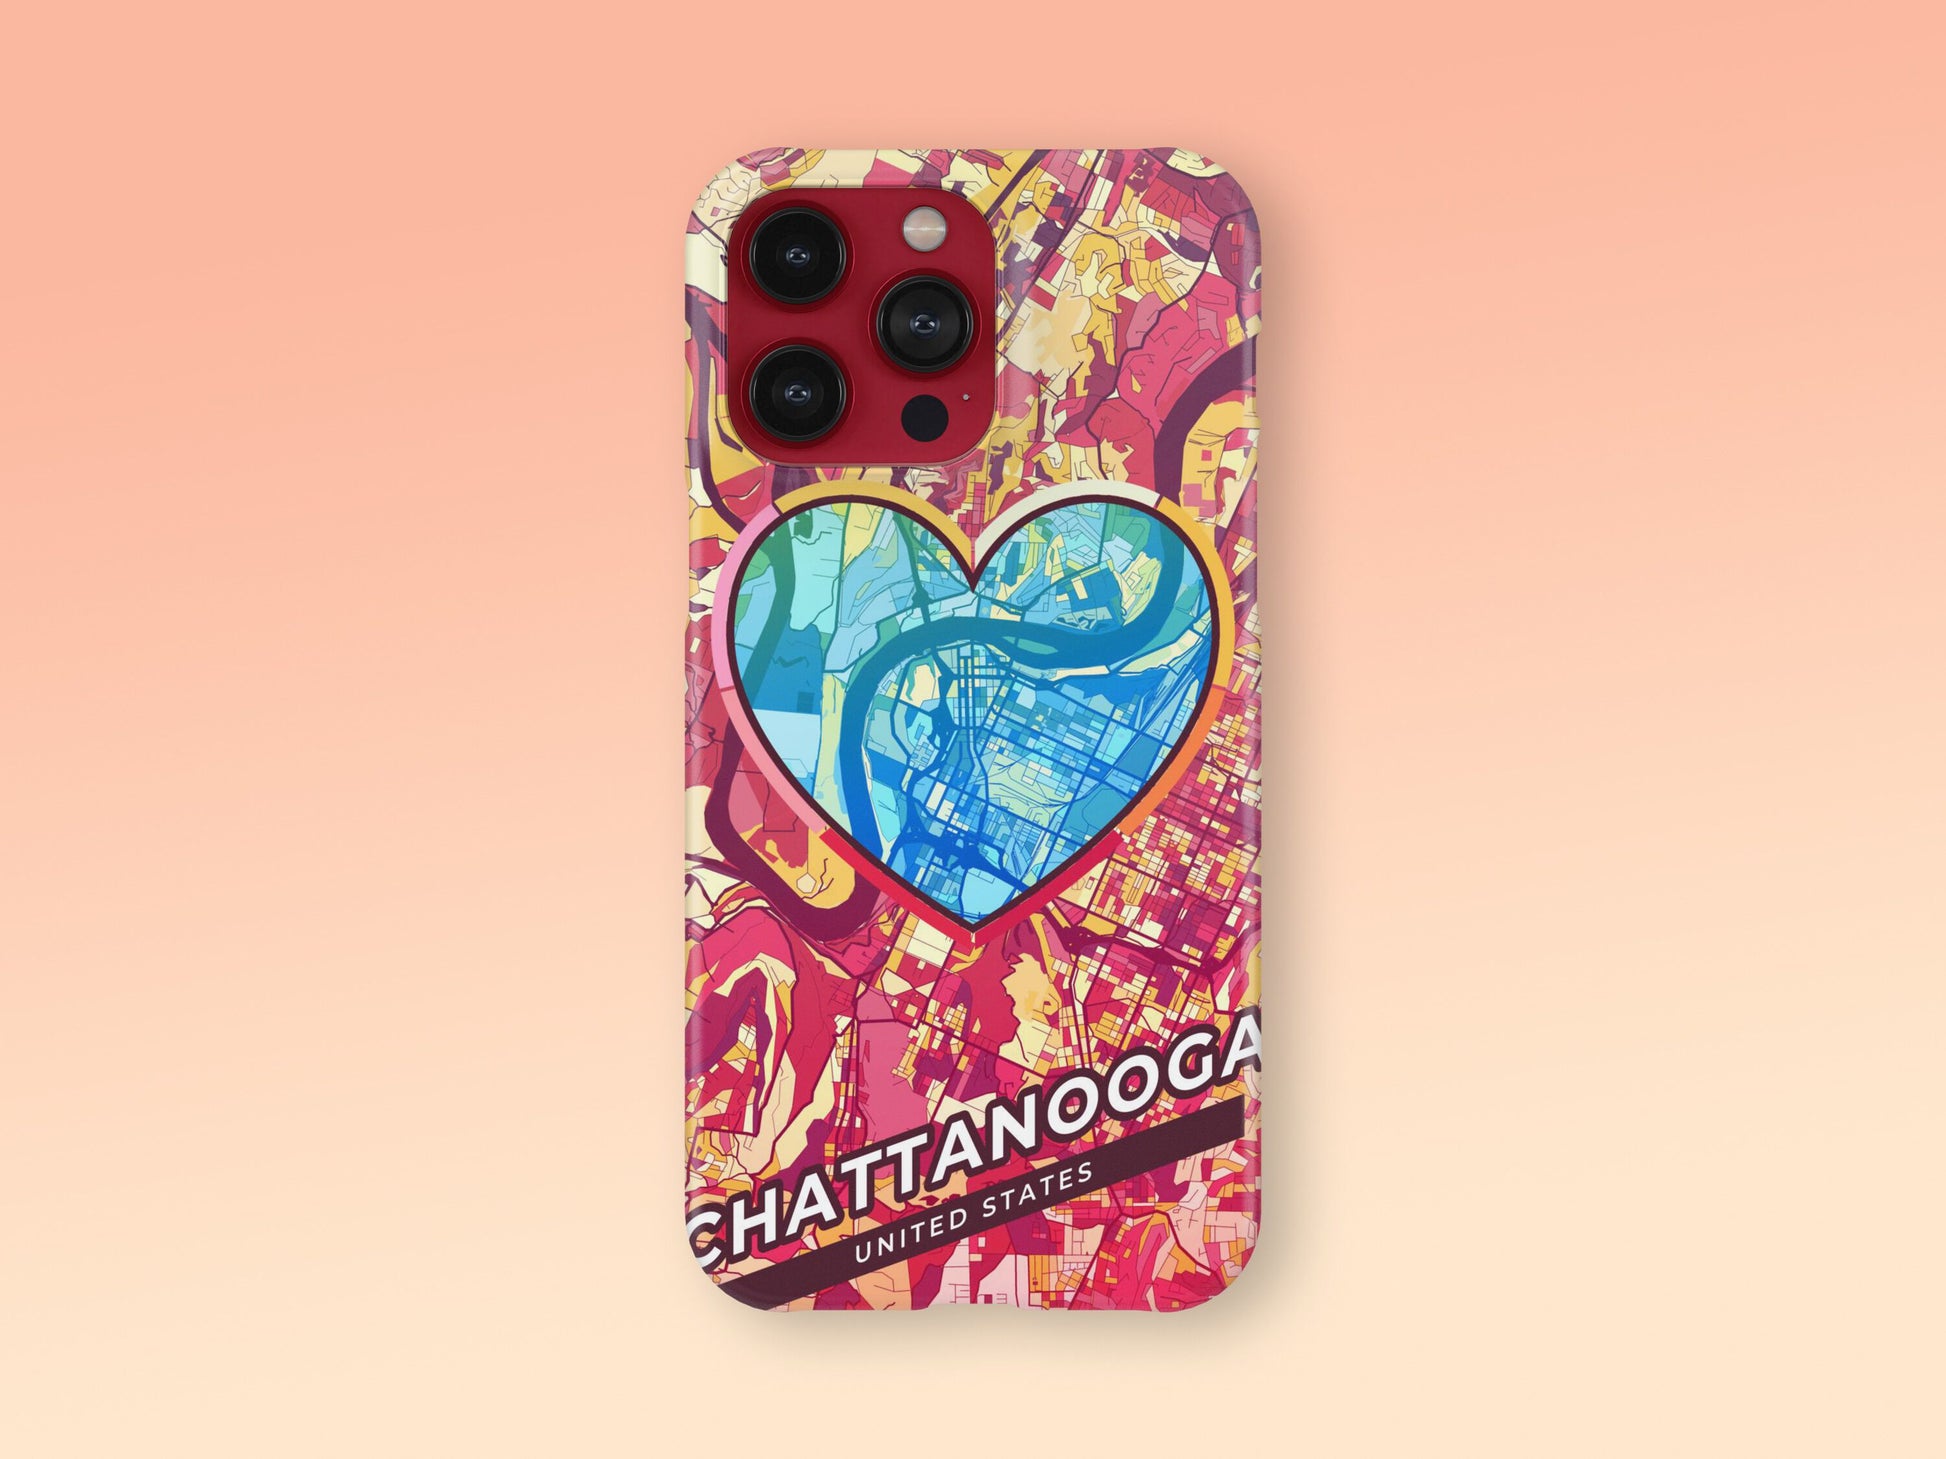 Chattanooga Tennessee slim phone case with colorful icon. Birthday, wedding or housewarming gift. Couple match cases. 2